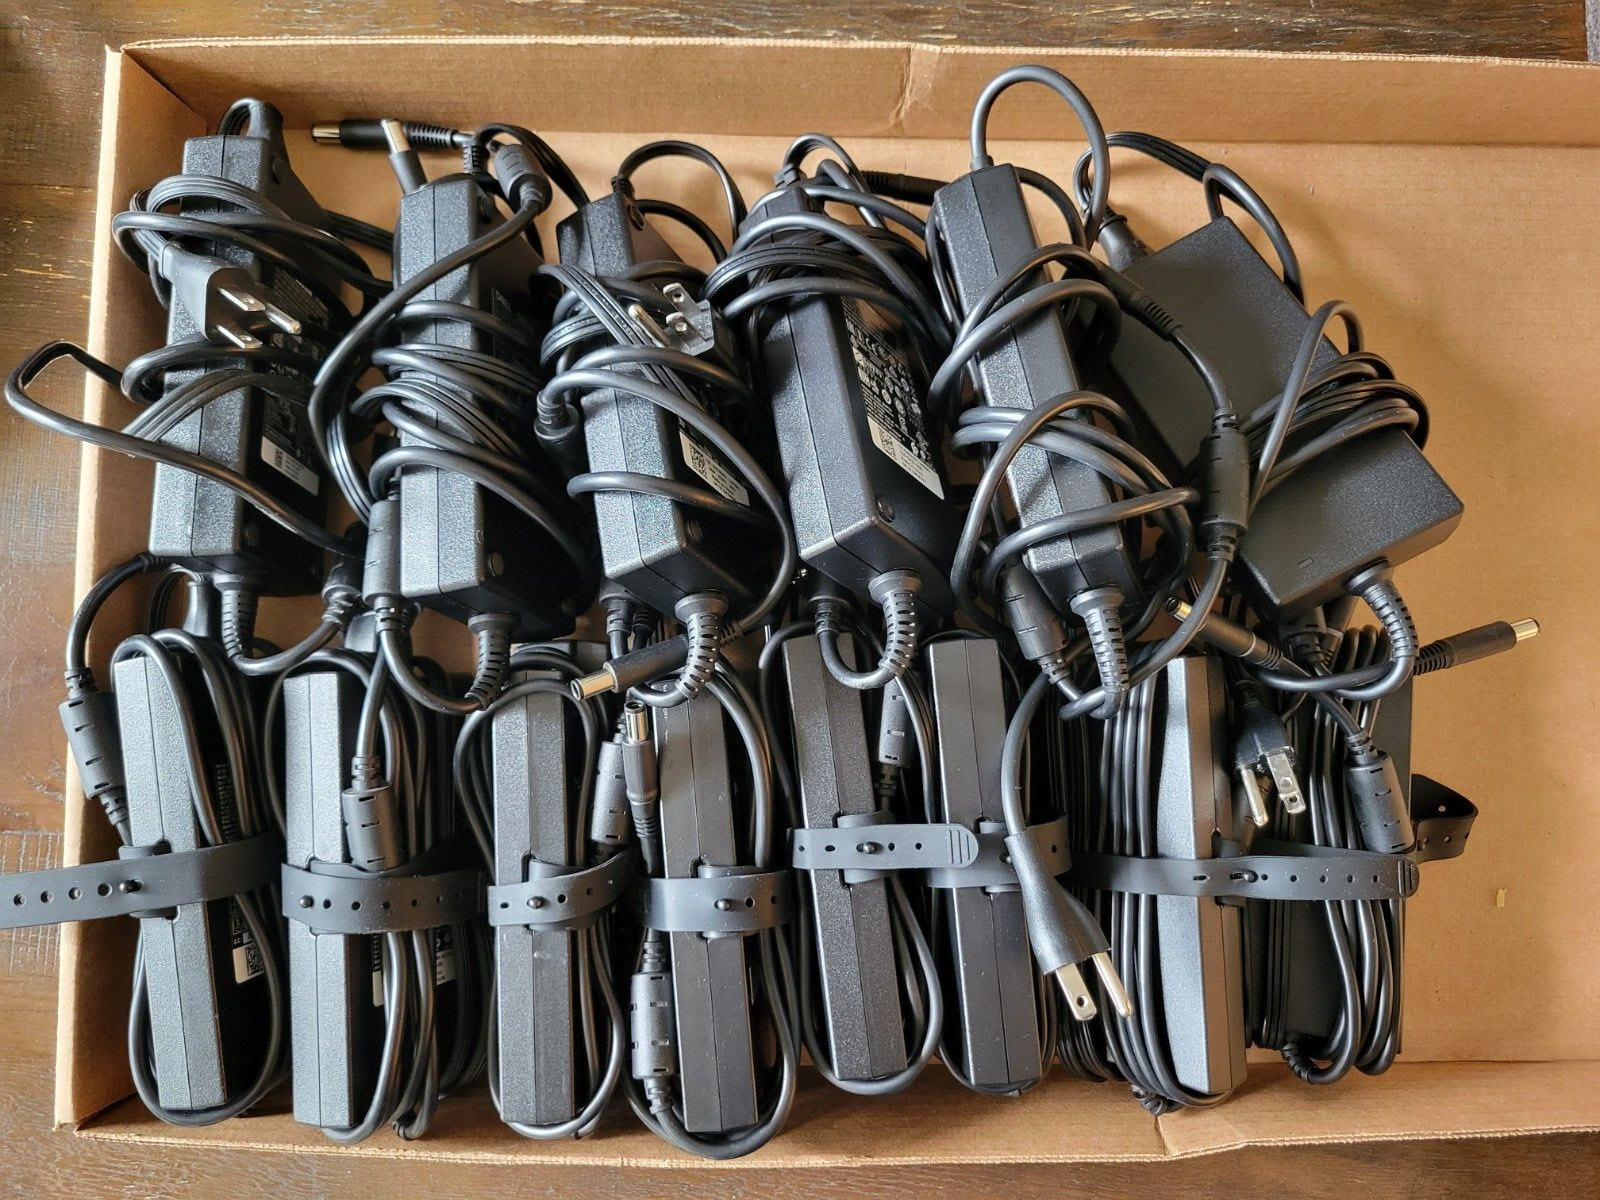 Lot of 14 OEM Original Dell 130W/180W Chargers/Power Supplies - Tested